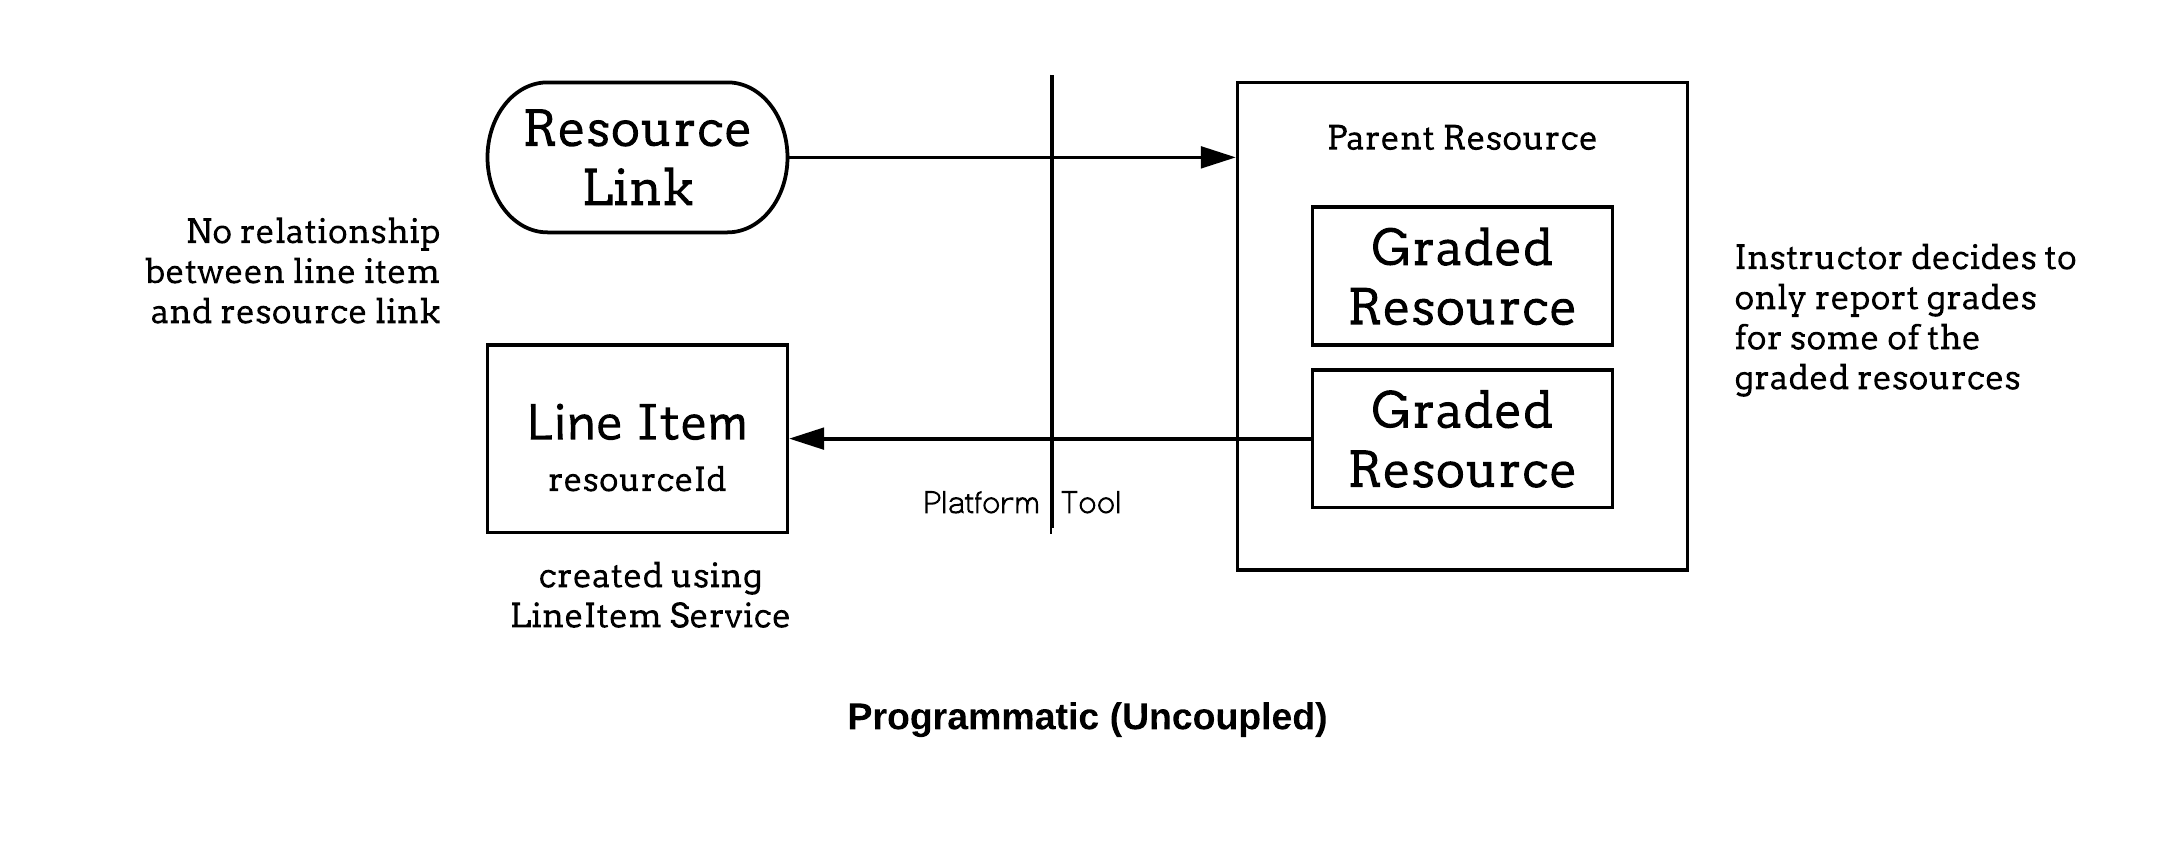 Illustrates the lifecycle of the uncoupled or programmatic line item